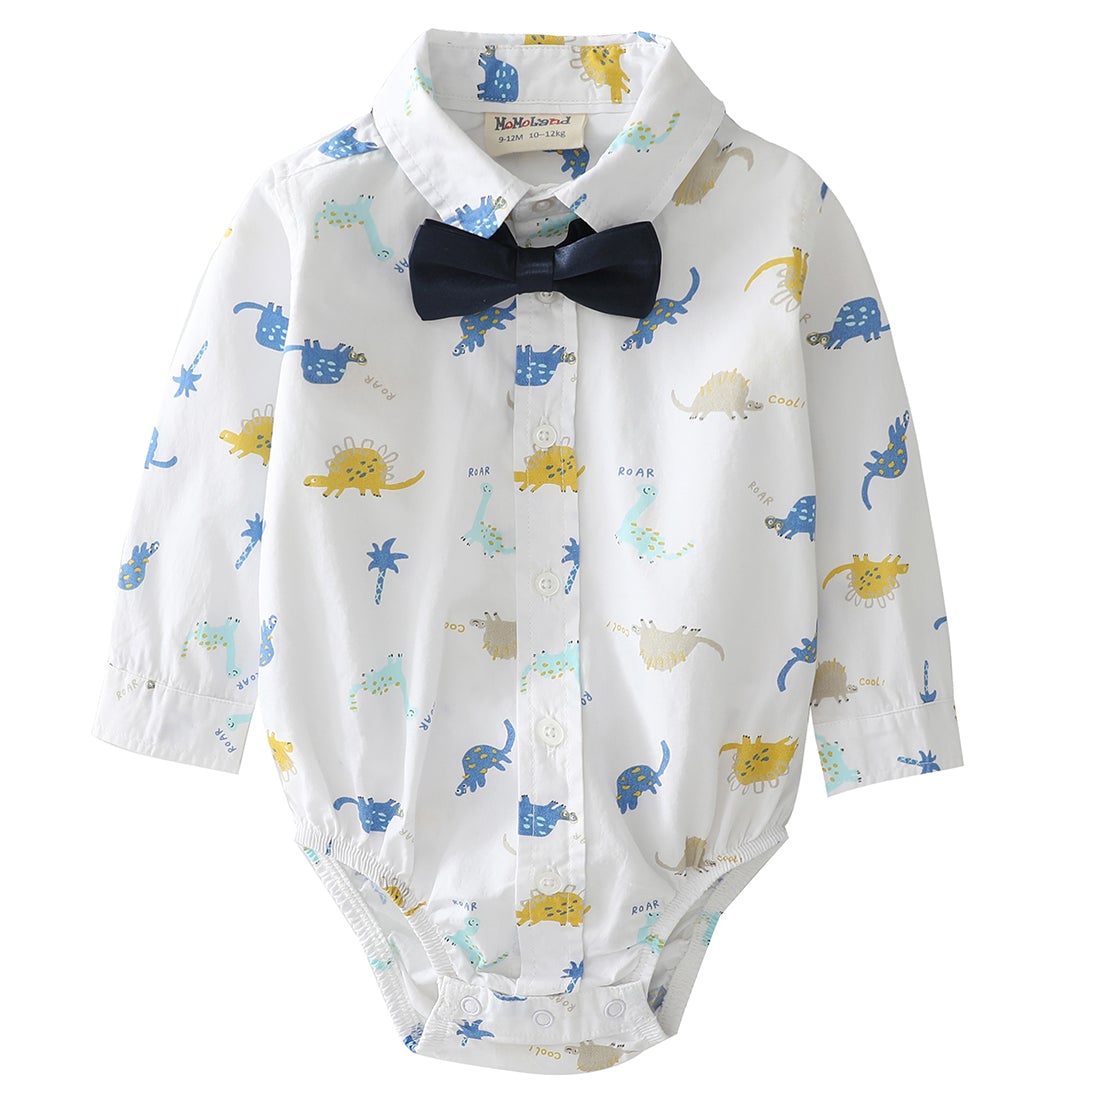 Momoland baby boy long sleeve dinosaur print white woven bodysuit with bow front